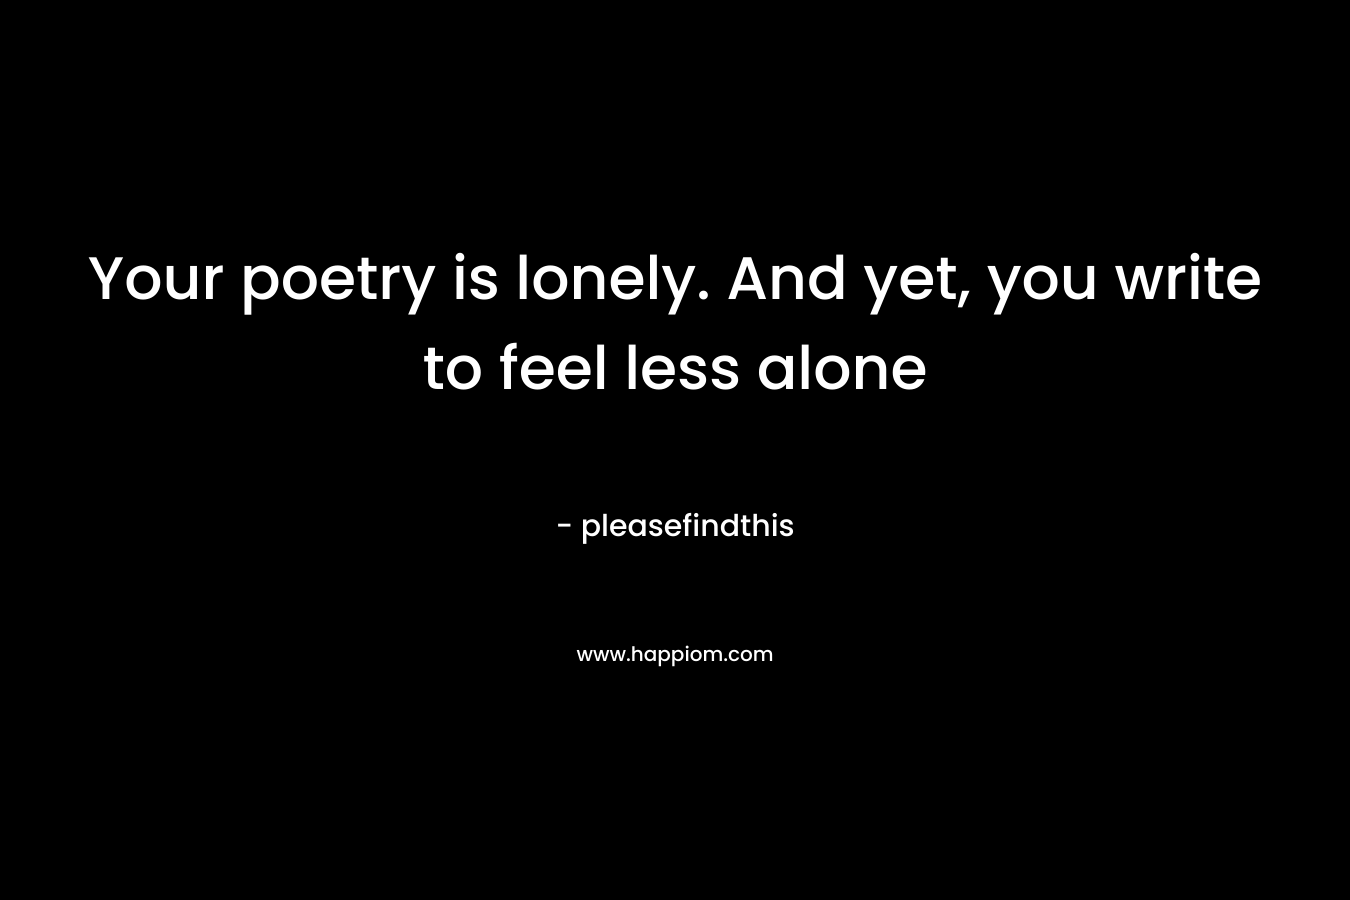 Your poetry is lonely. And yet, you write to feel less alone